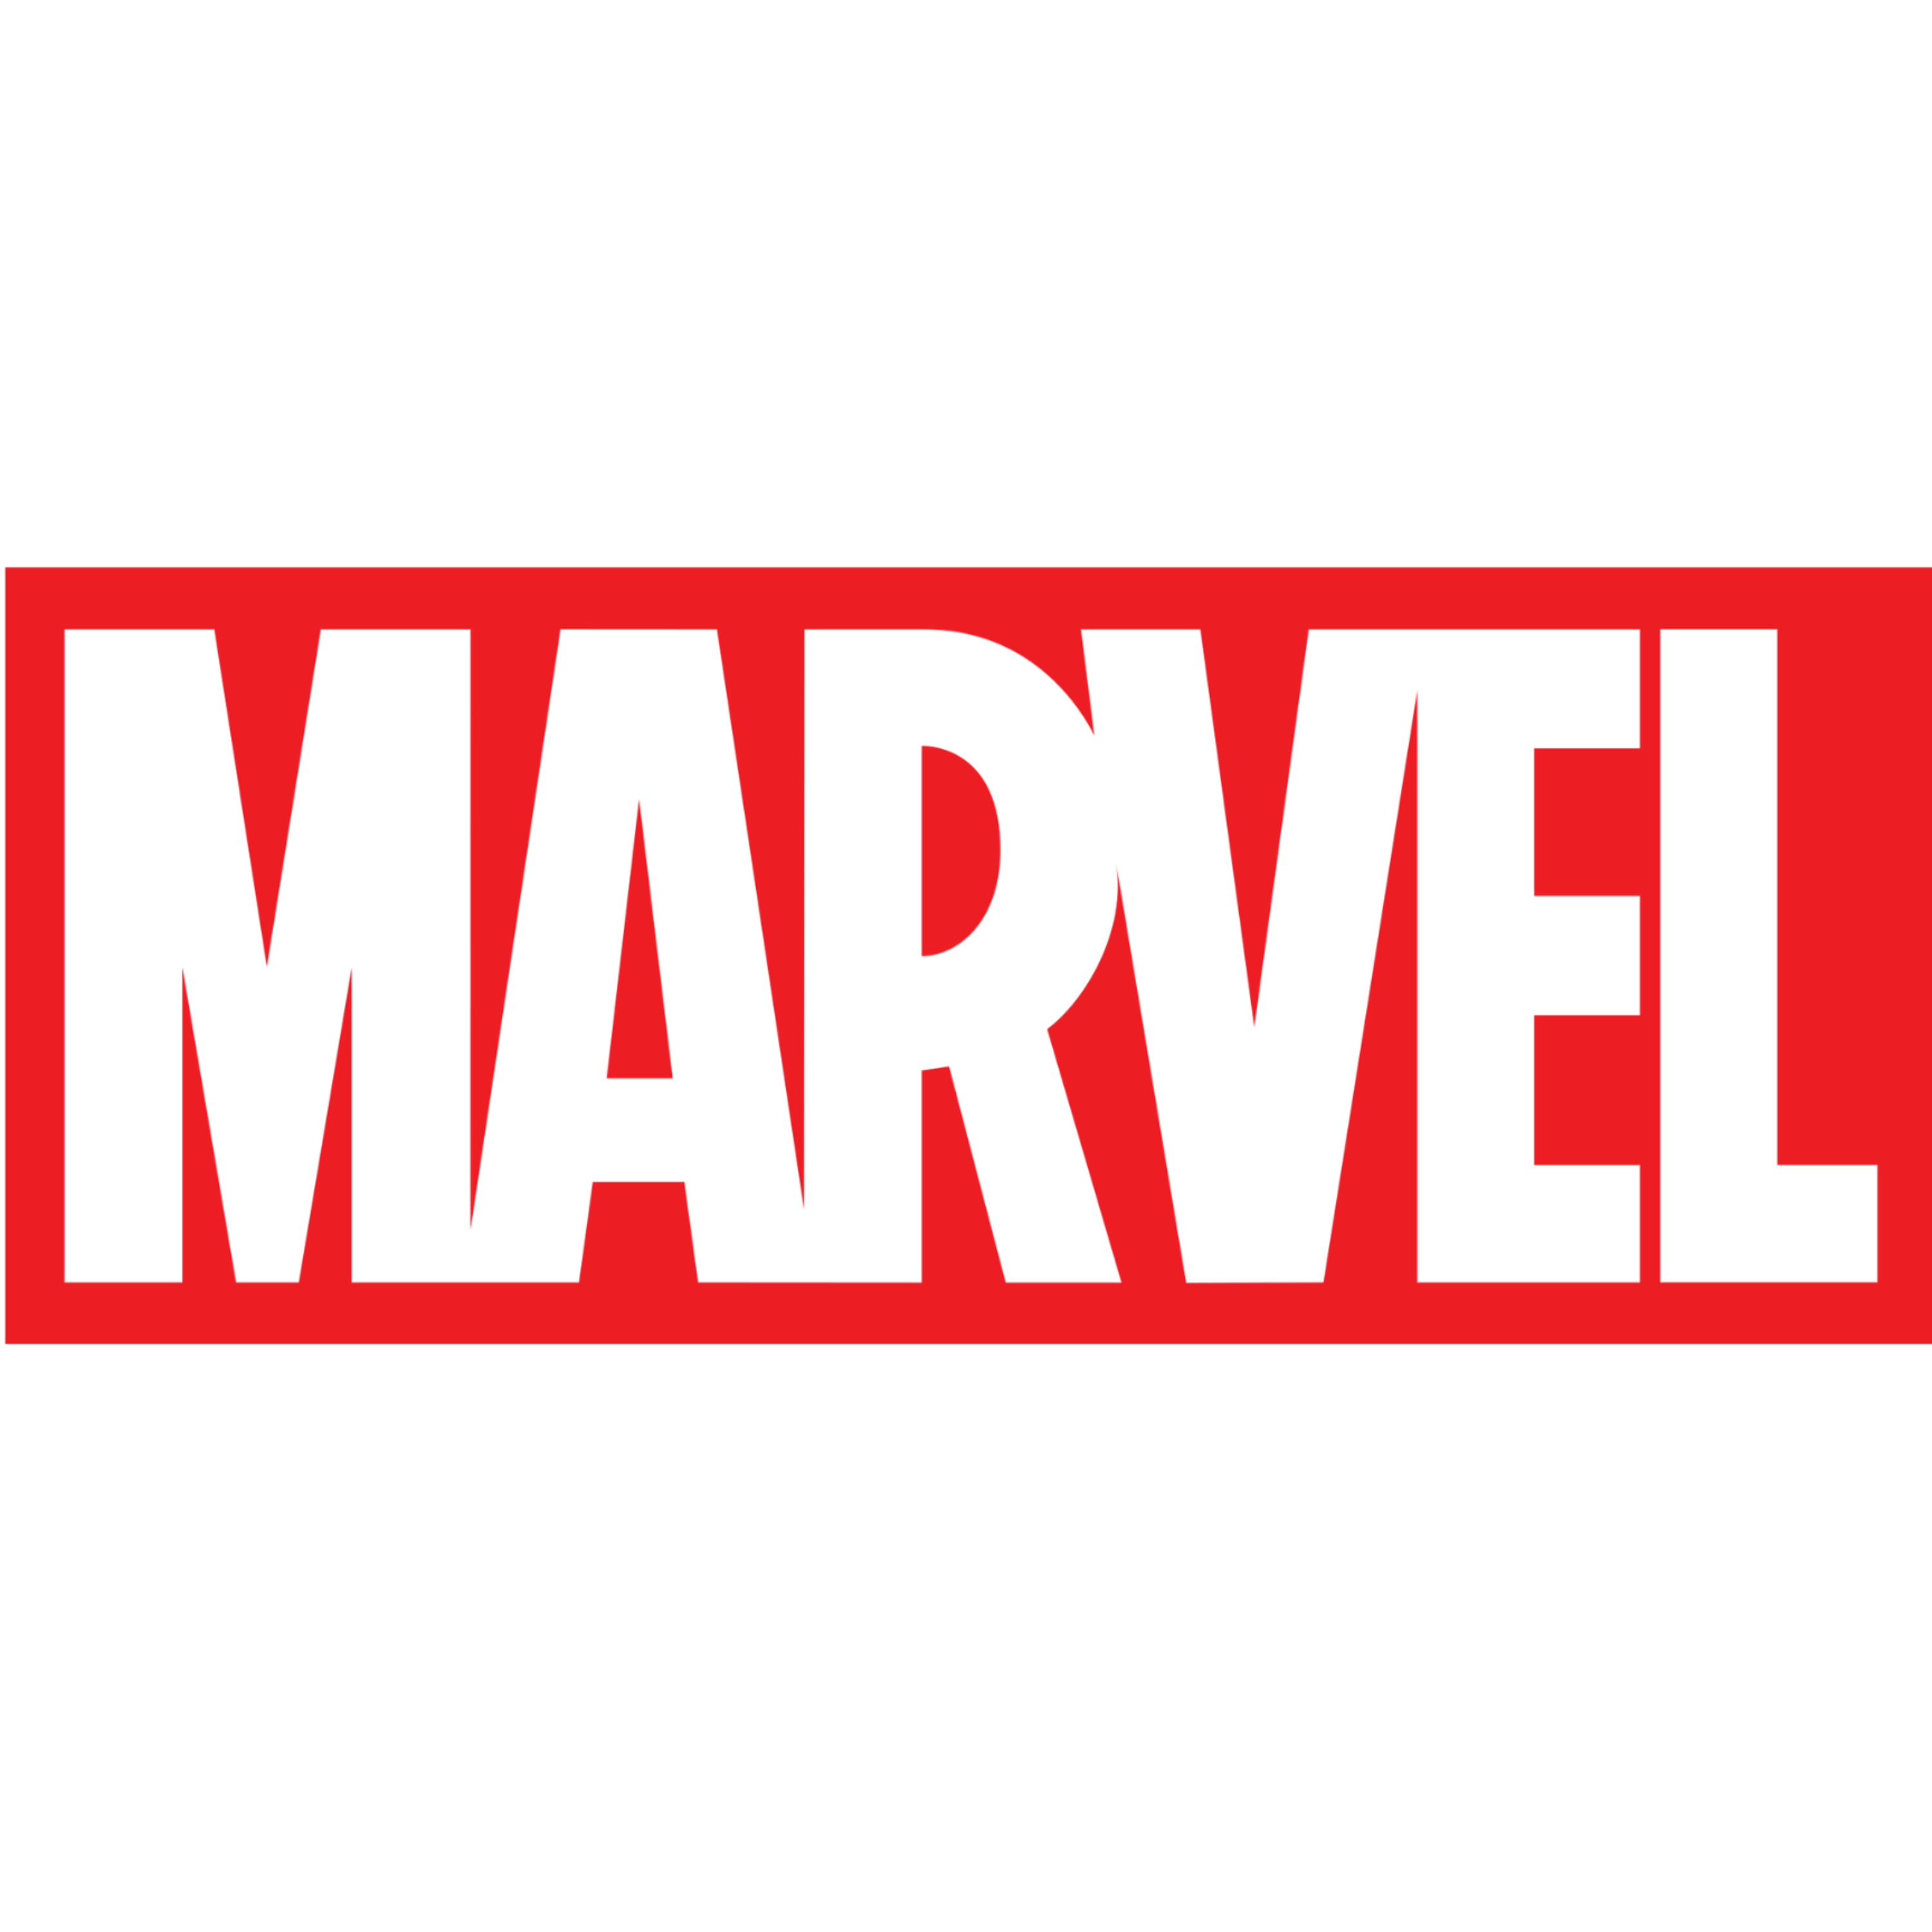 Shop Marvel products